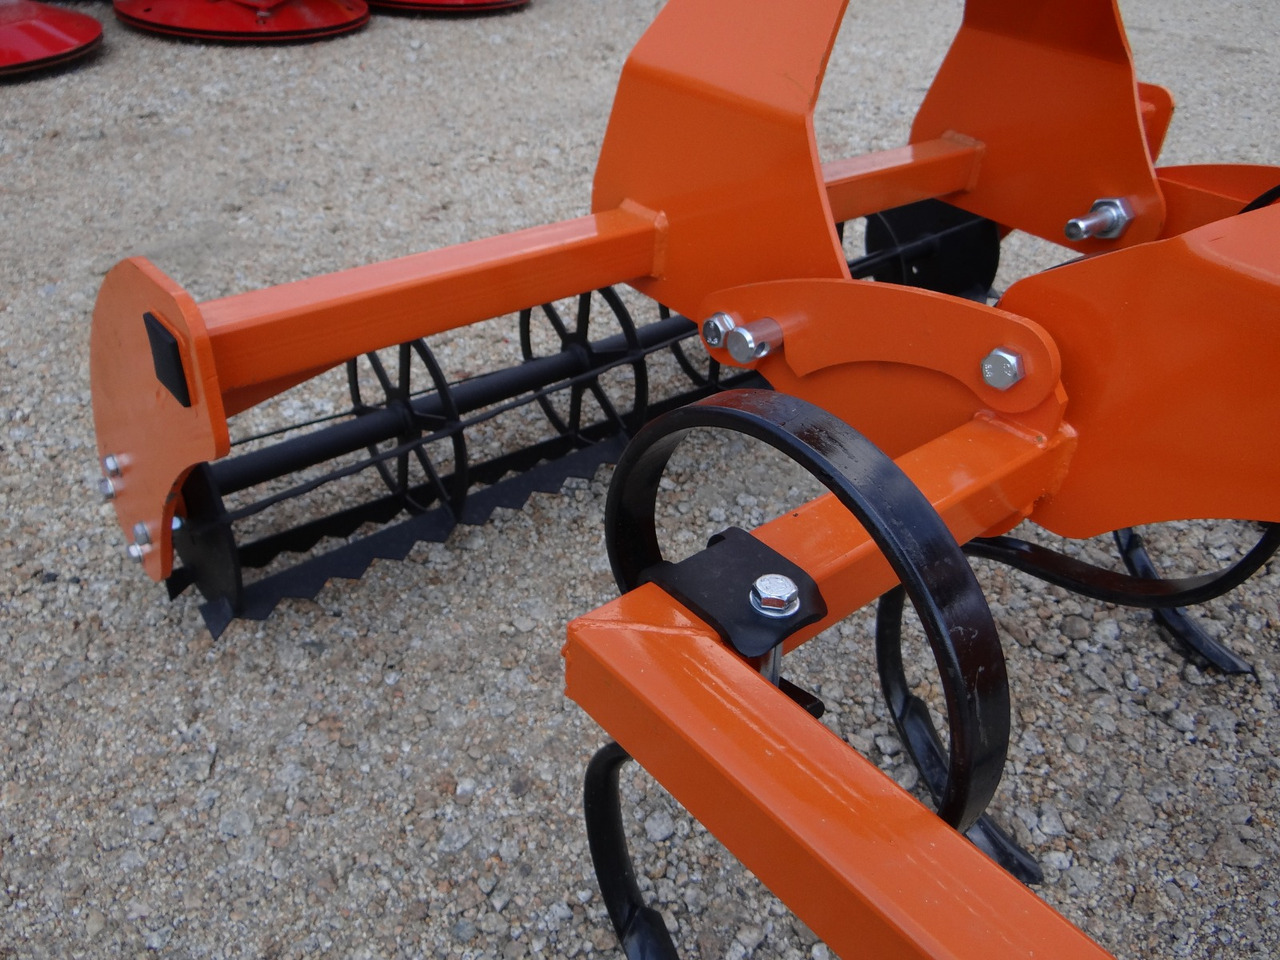 New Cultivator Mini Cultivator 1,2m / Feingrubber Grubber / Kultywator: picture 3